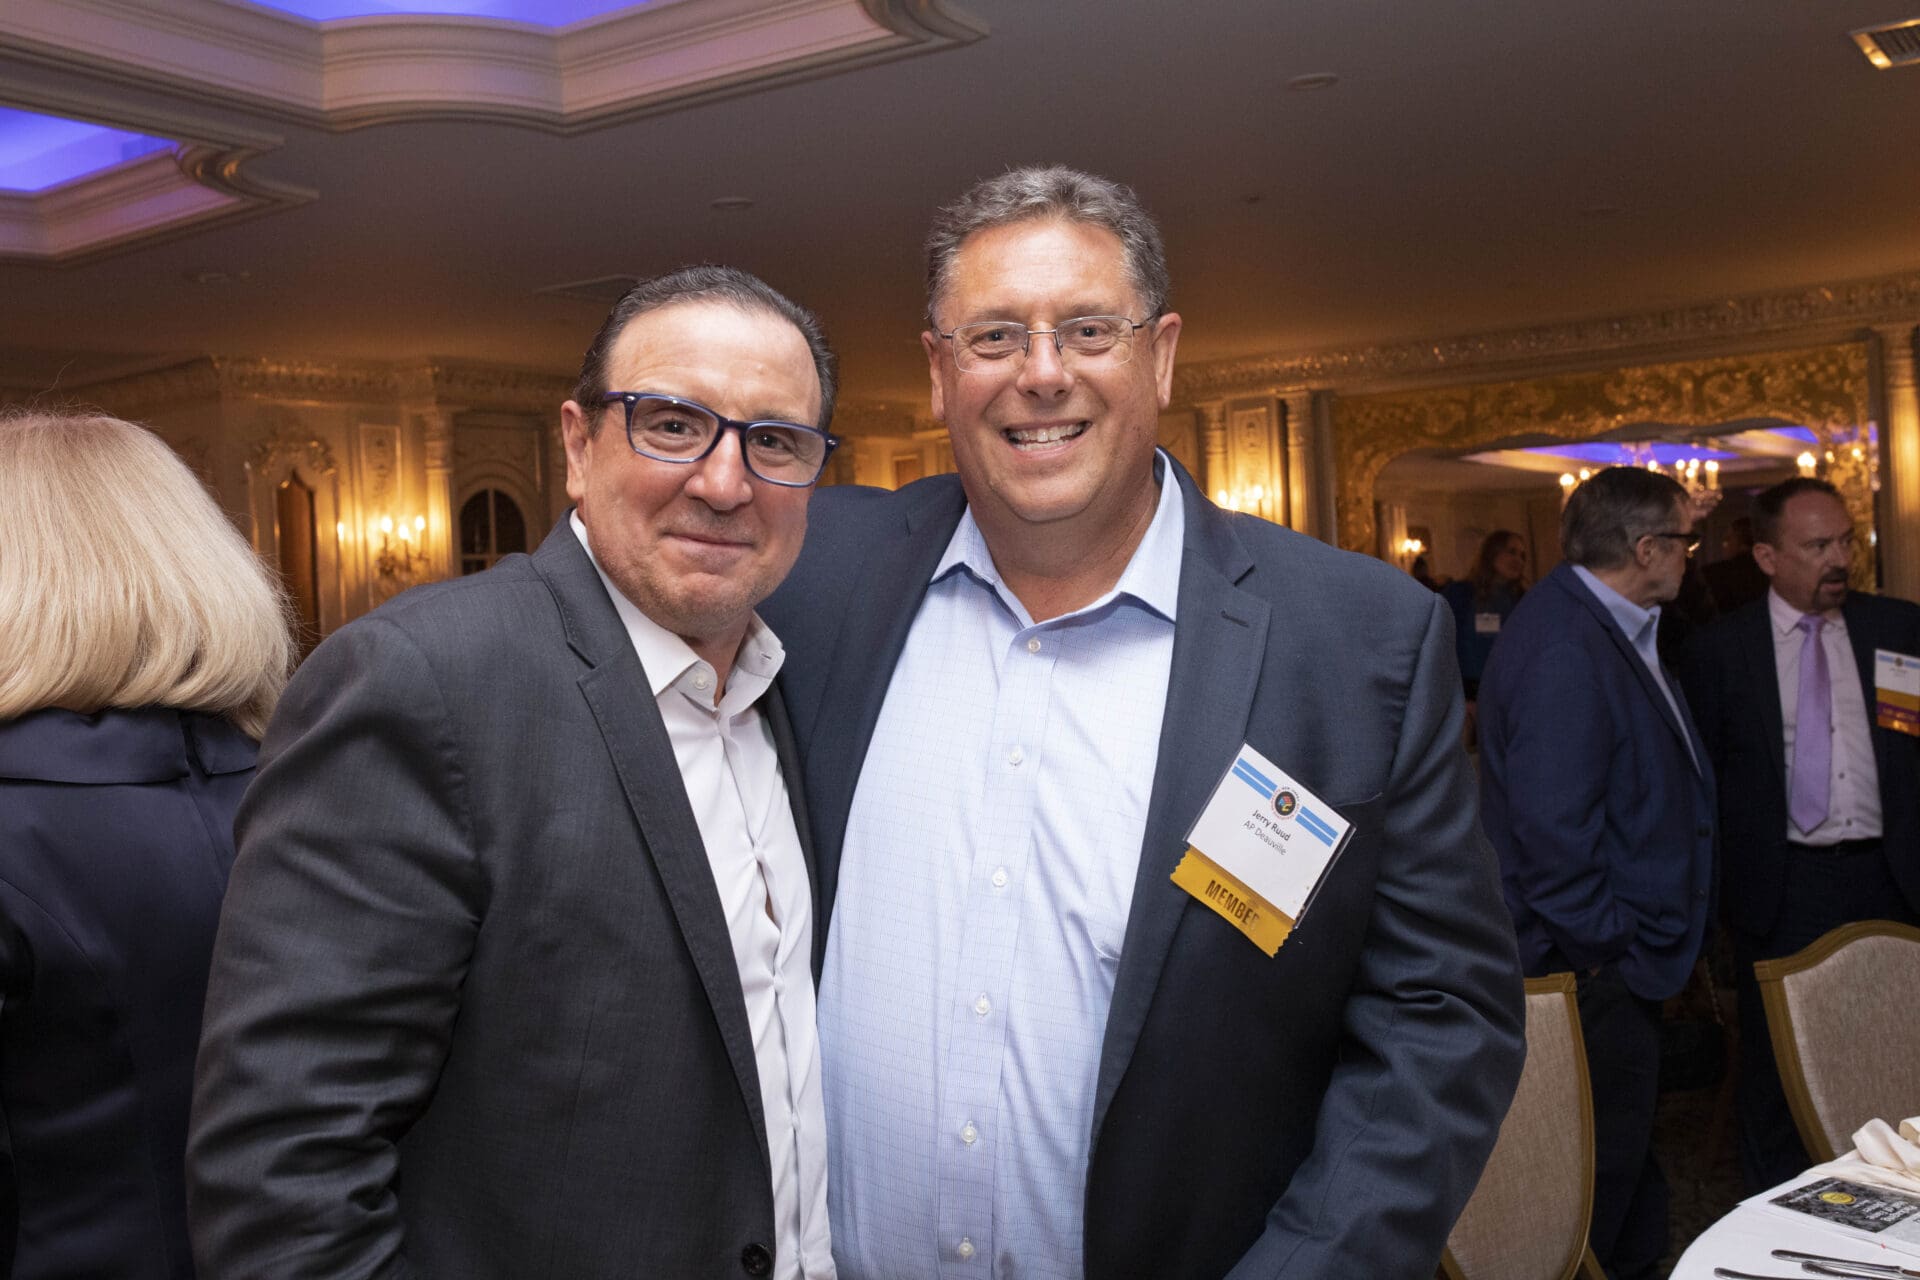 Two men posing for a photo at a business event.